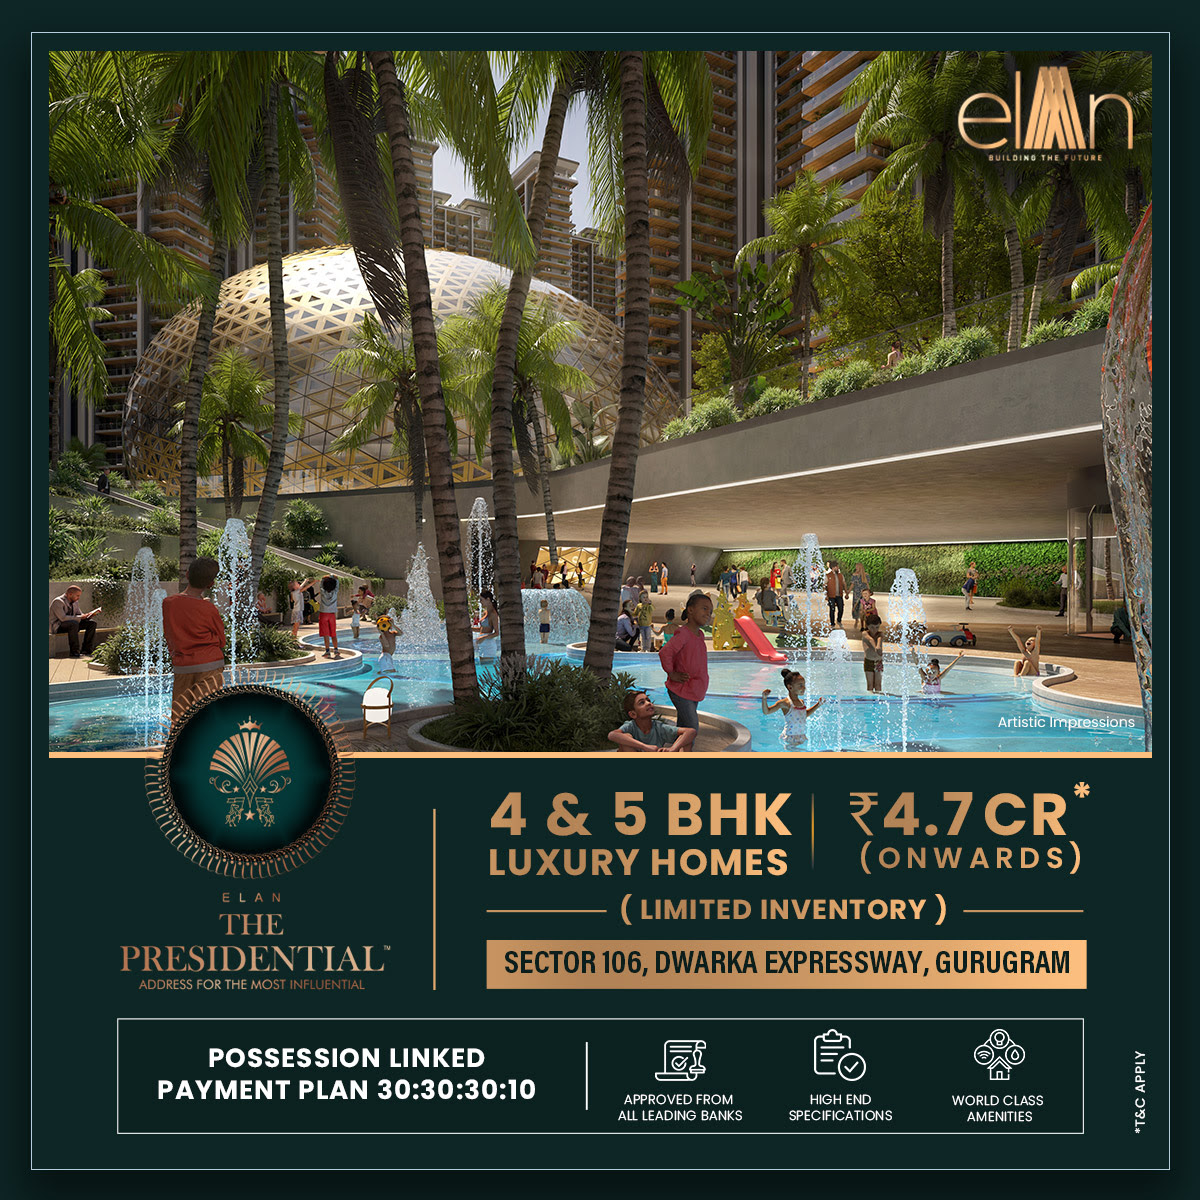 Posession linked payment plan 30:30:30:10 and approved from all leading banks at Elan The Presidential, Gurgaon